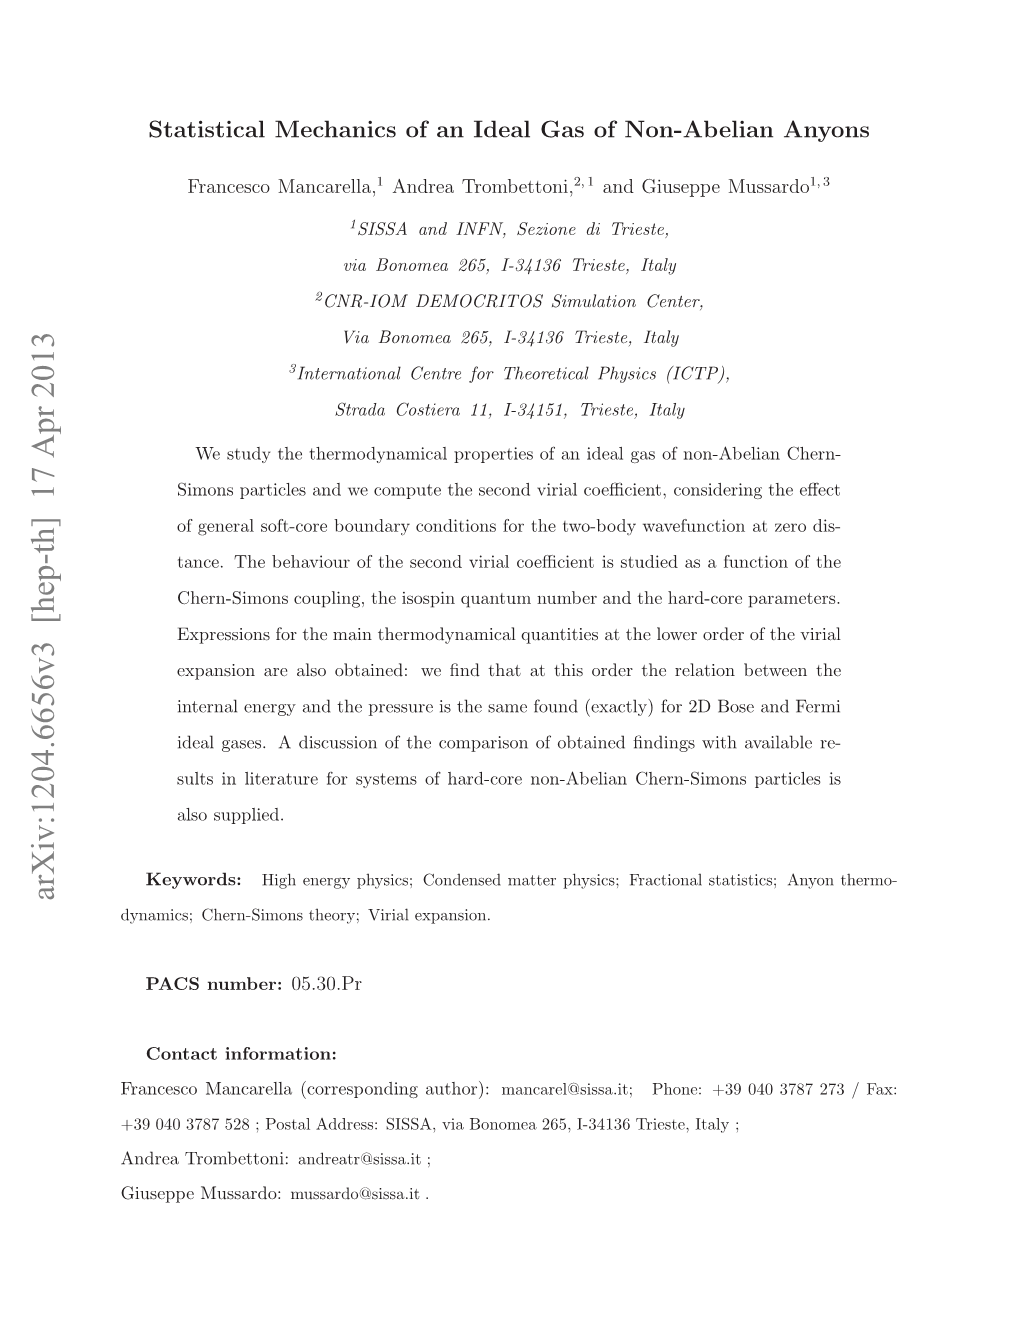 Statistical Mechanics of an Ideal Gas of Non-Abelian Anyons